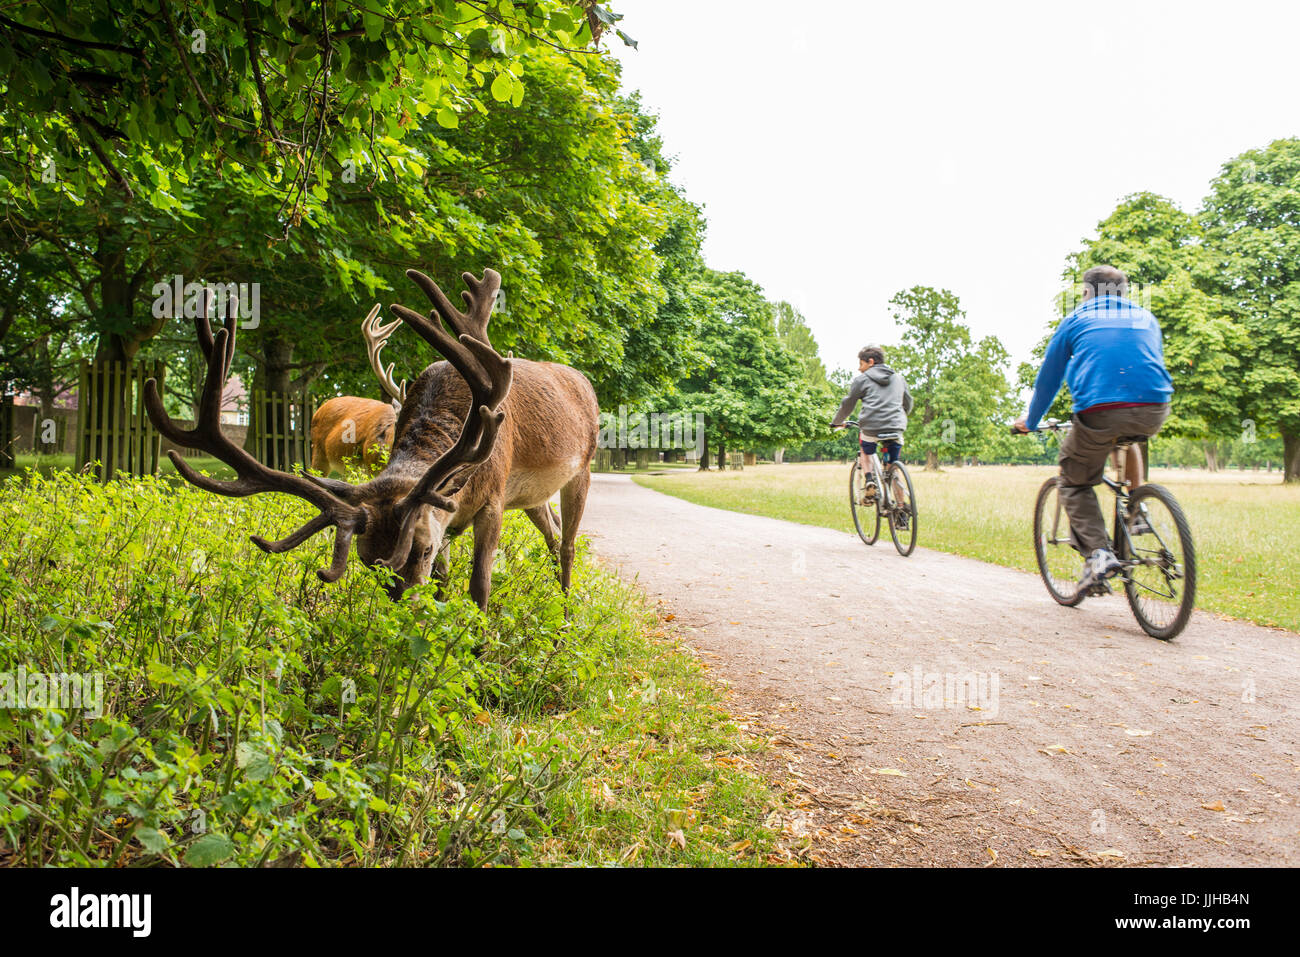 Richmond, London, UK - July 2017: Two cyclists cycling on a path next to red deers feeding on a grass meadow in Bushy park. Stock Photo